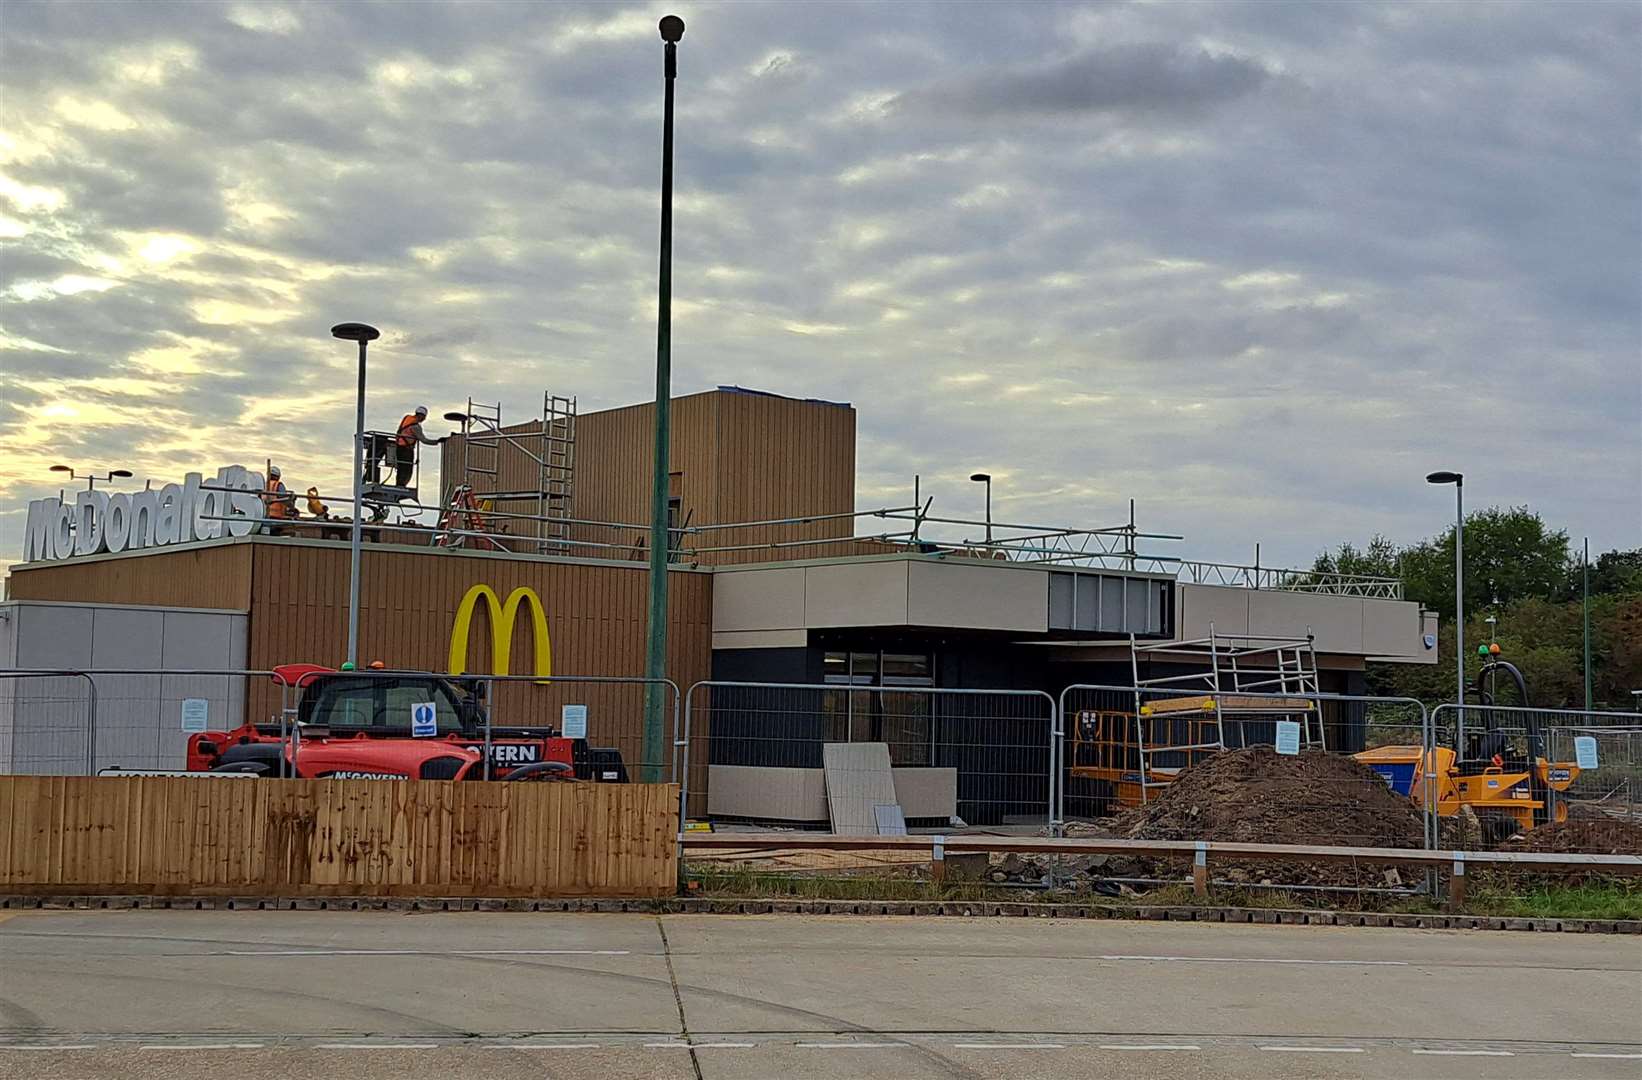 The new McDonald's at Discovery Park in Sandwich is set to open on October 25